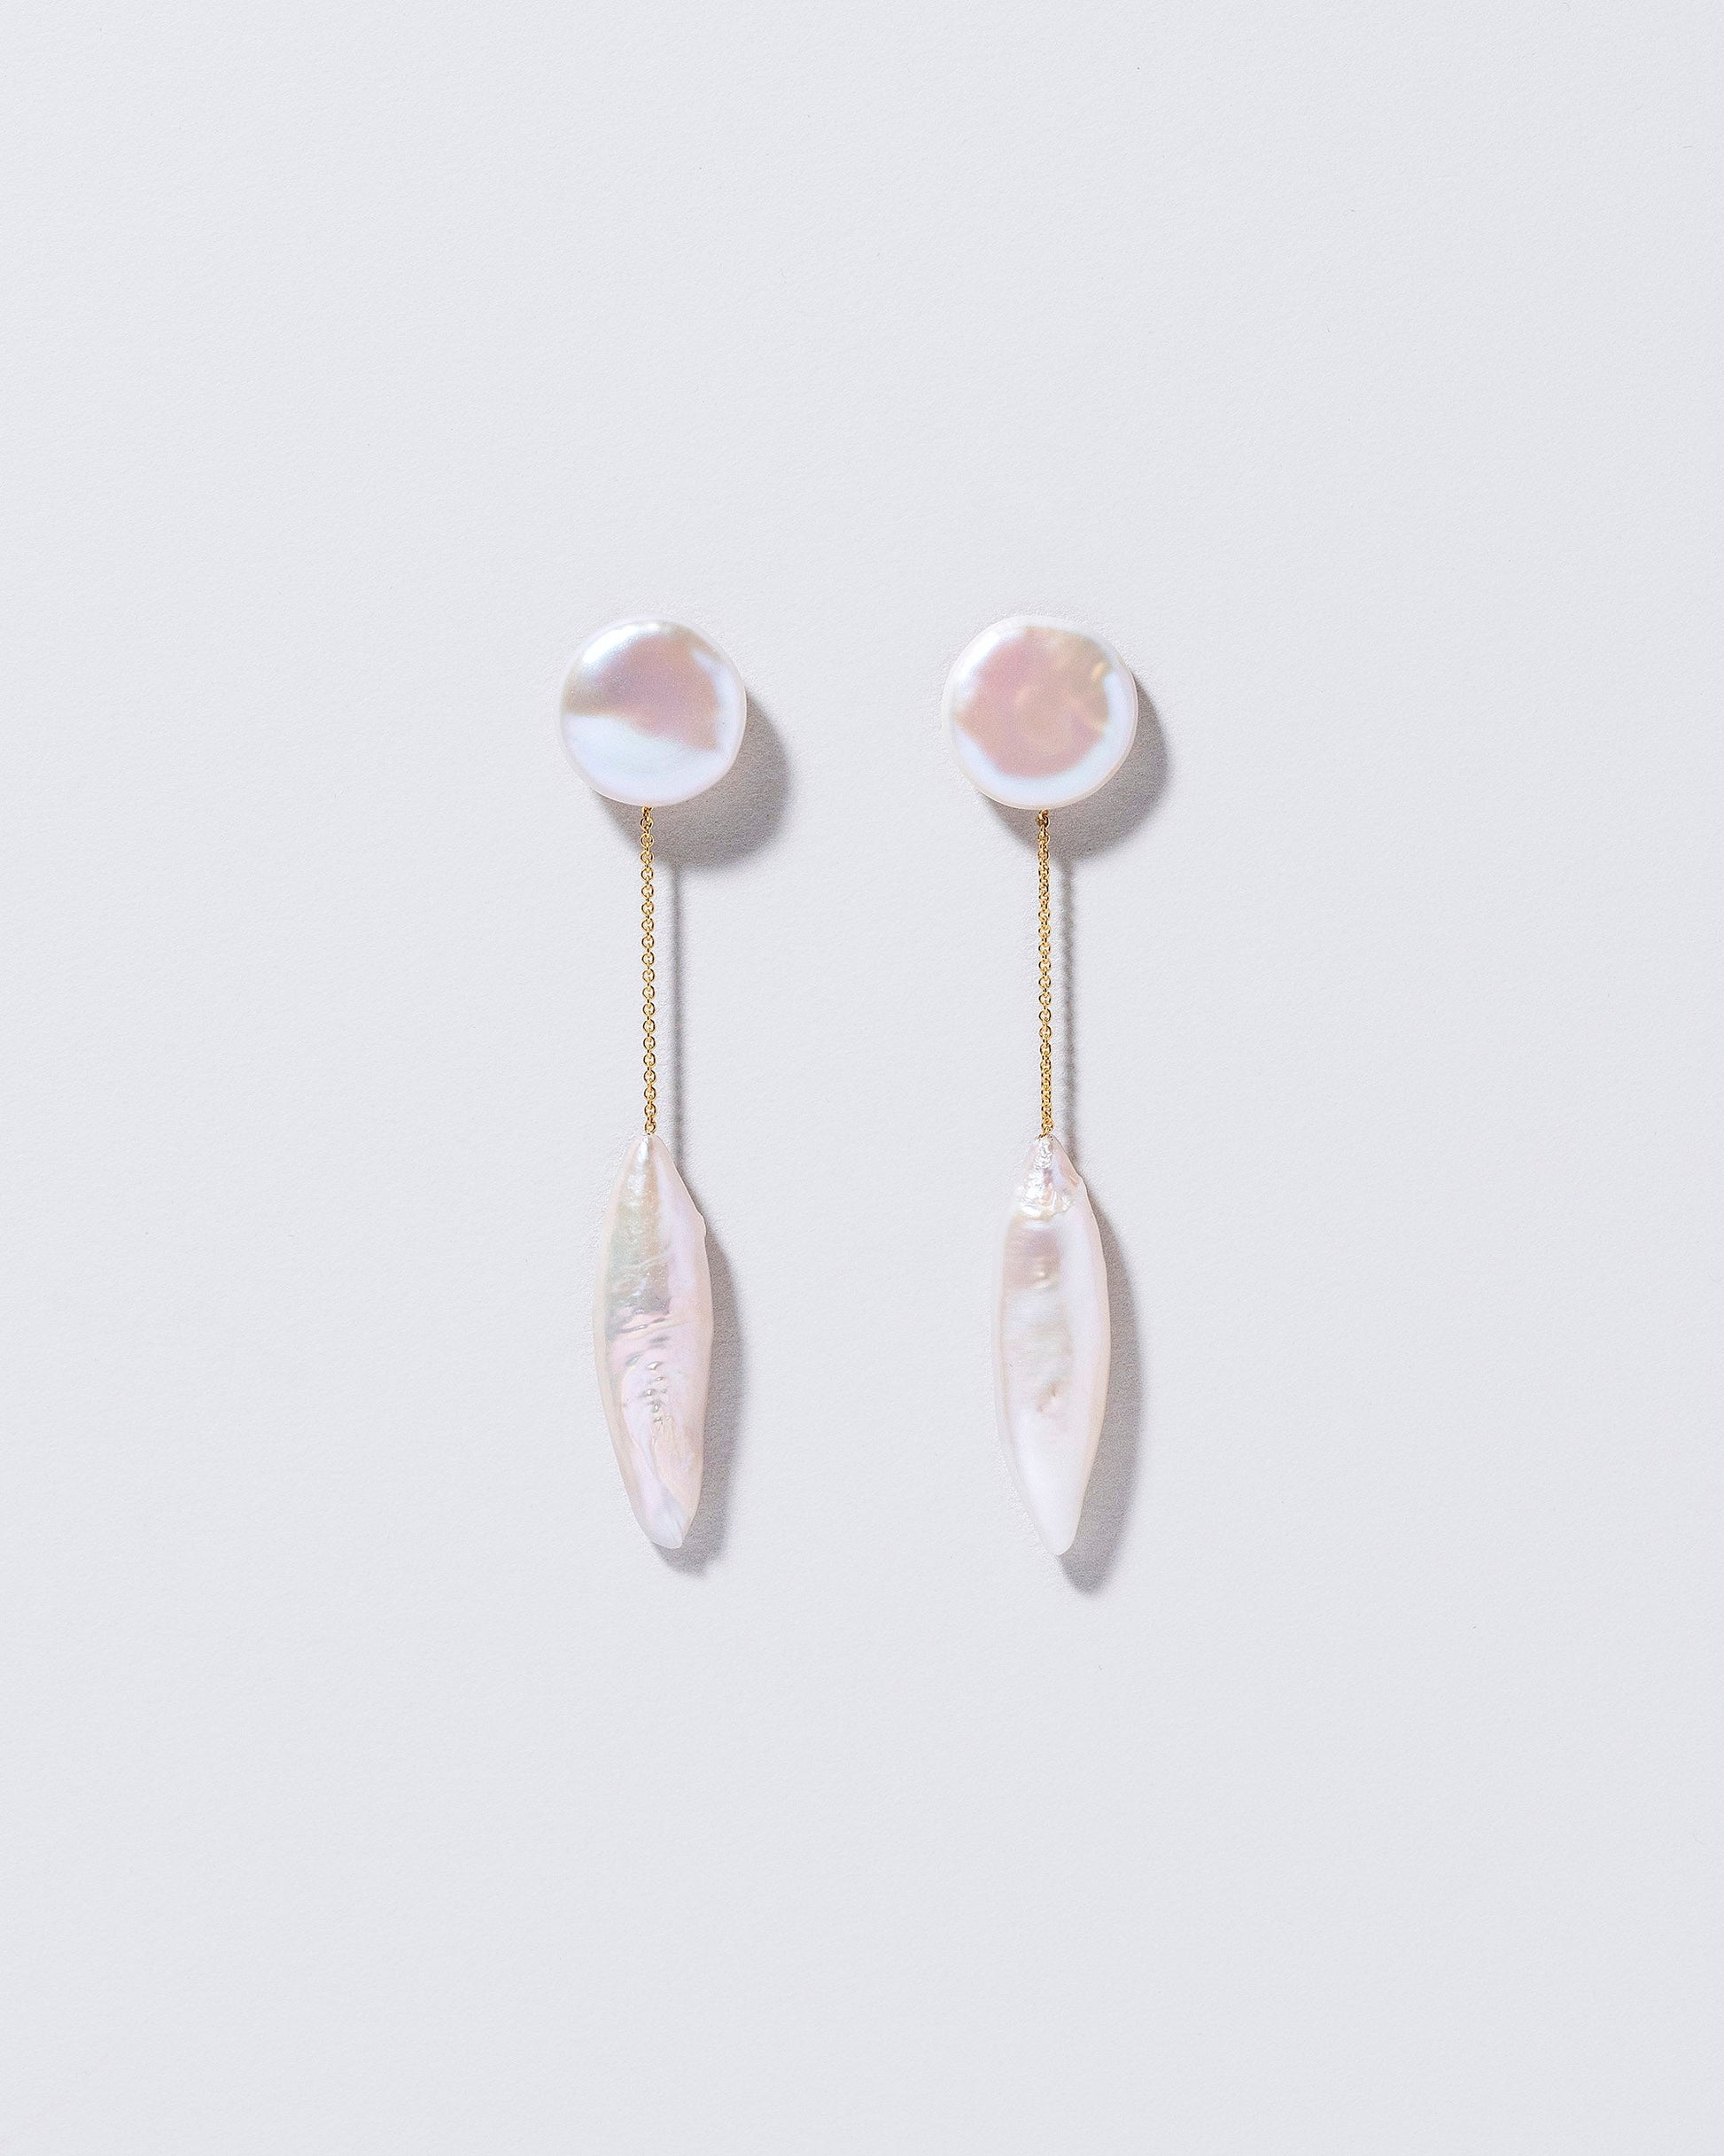  Triton Earrings on light color background.